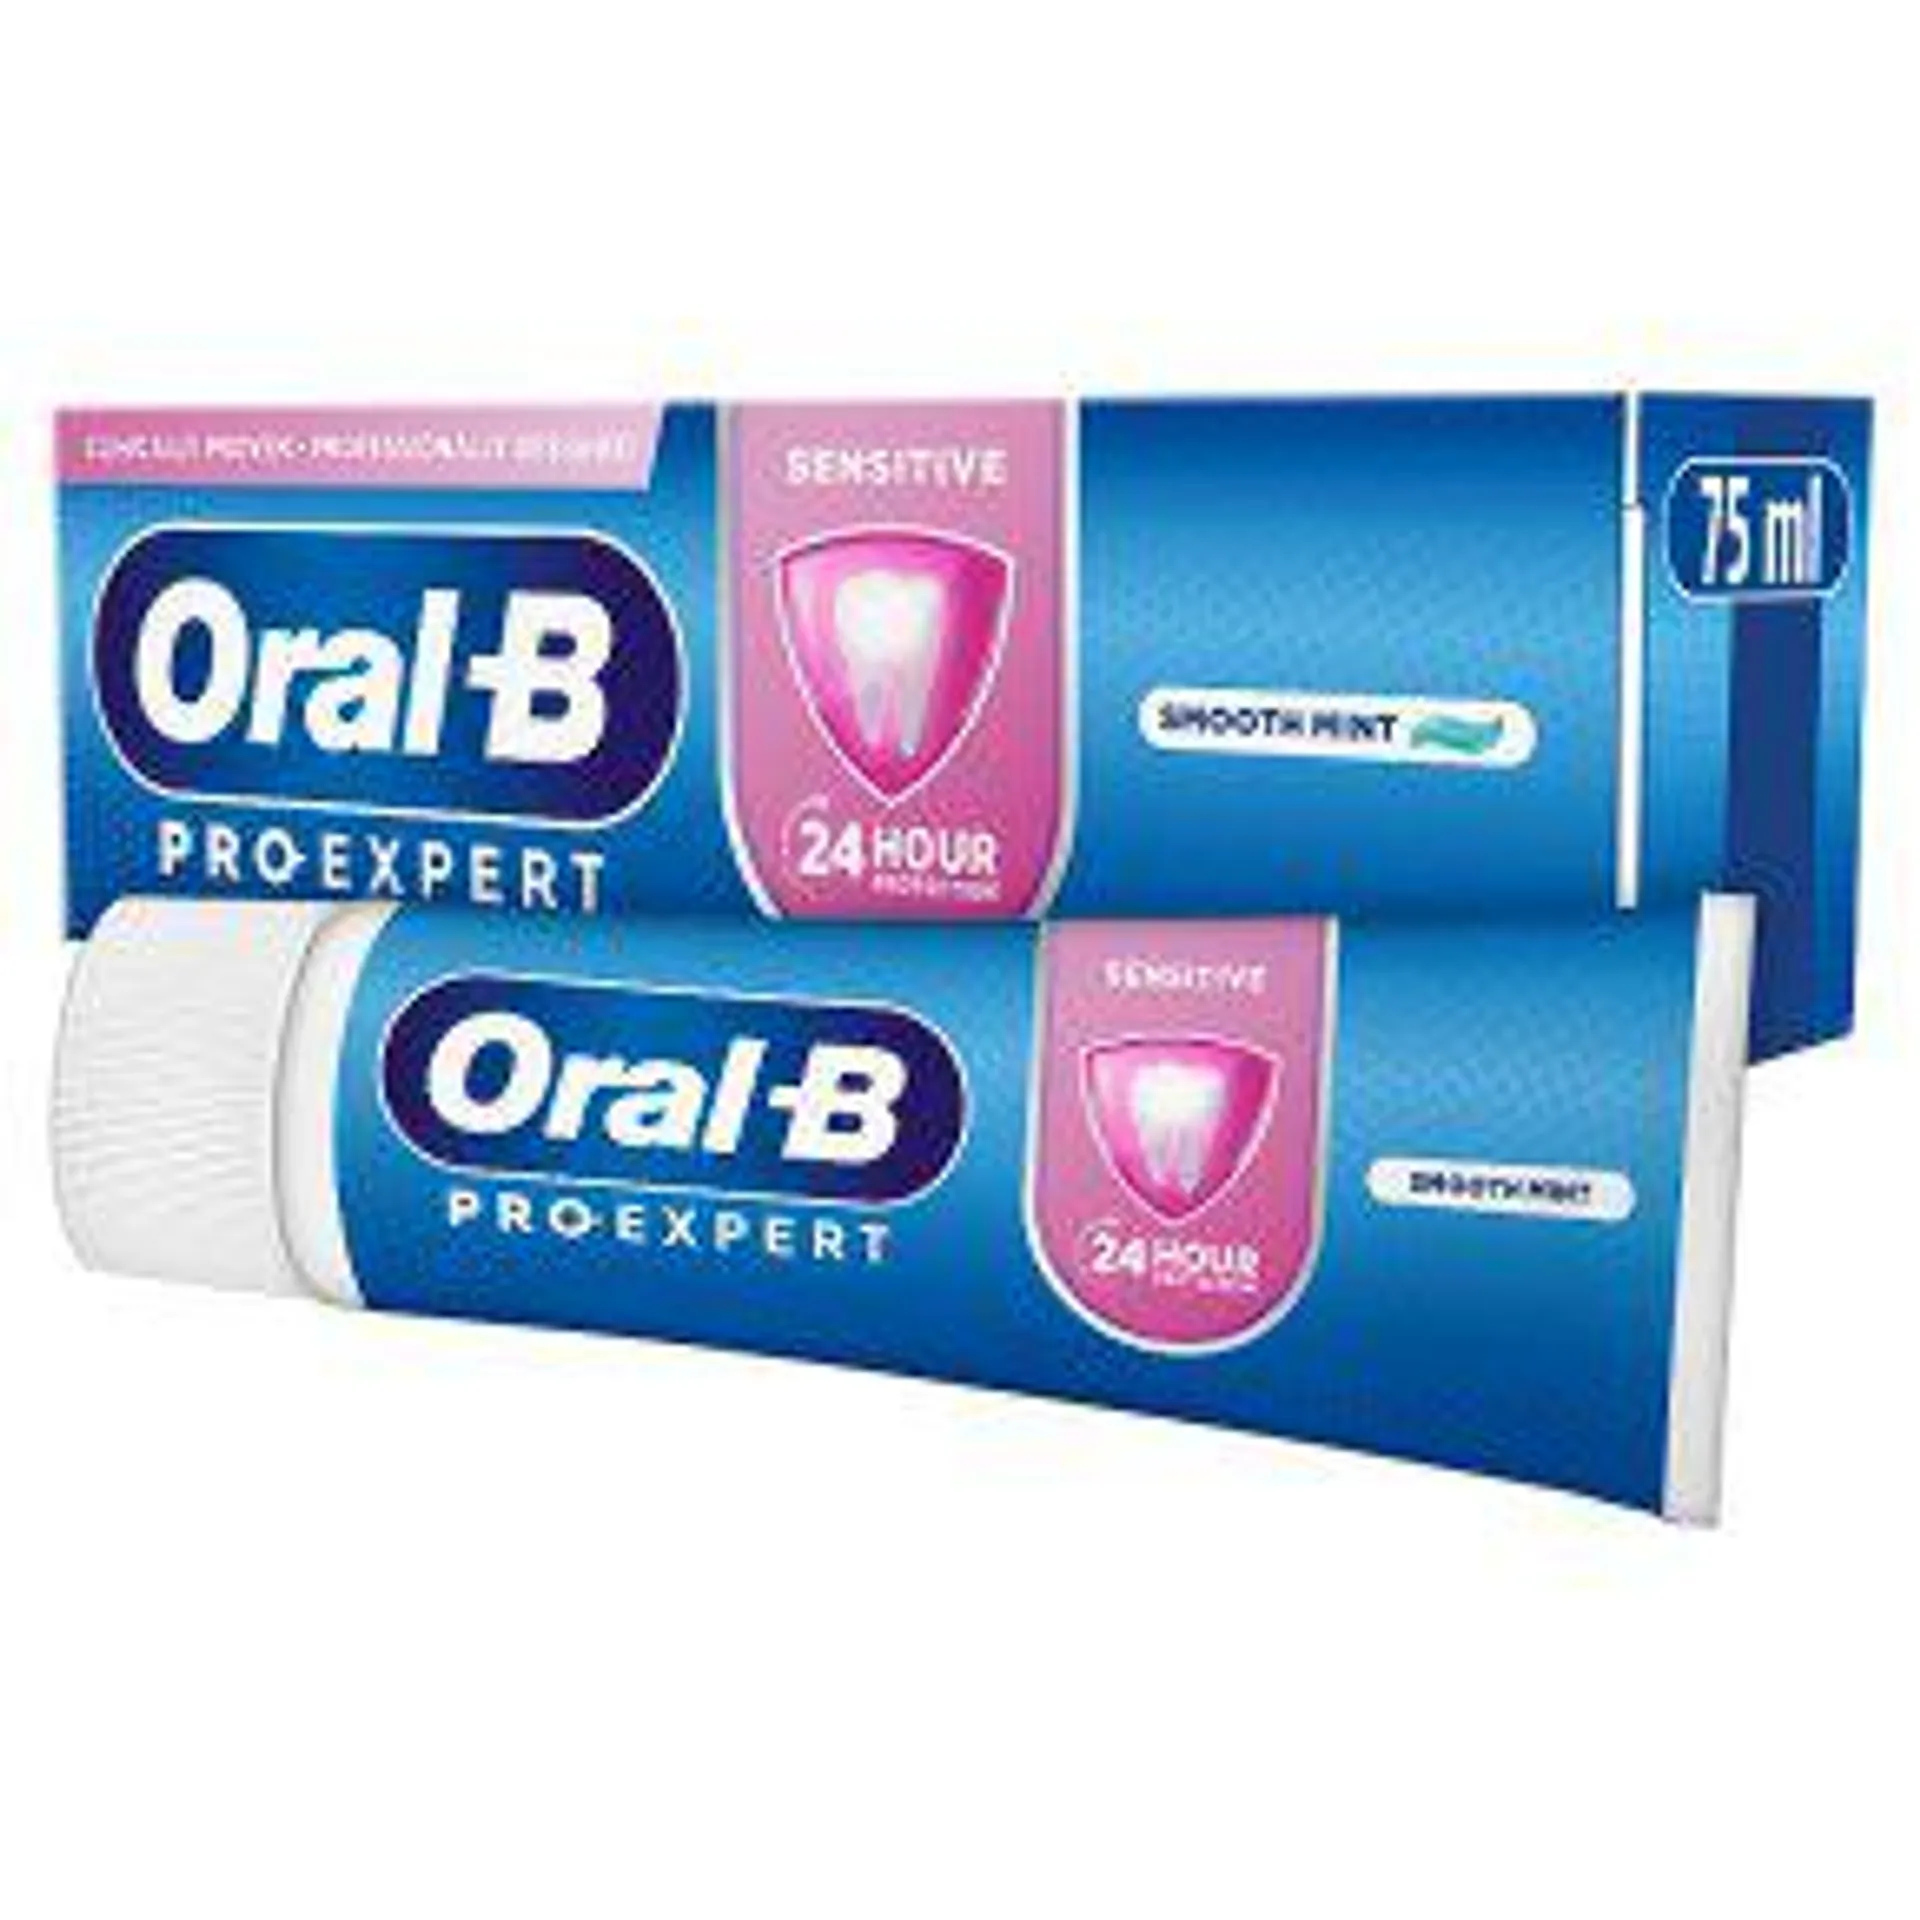 Oral-B Toothpaste Pro-Expert Sensitive